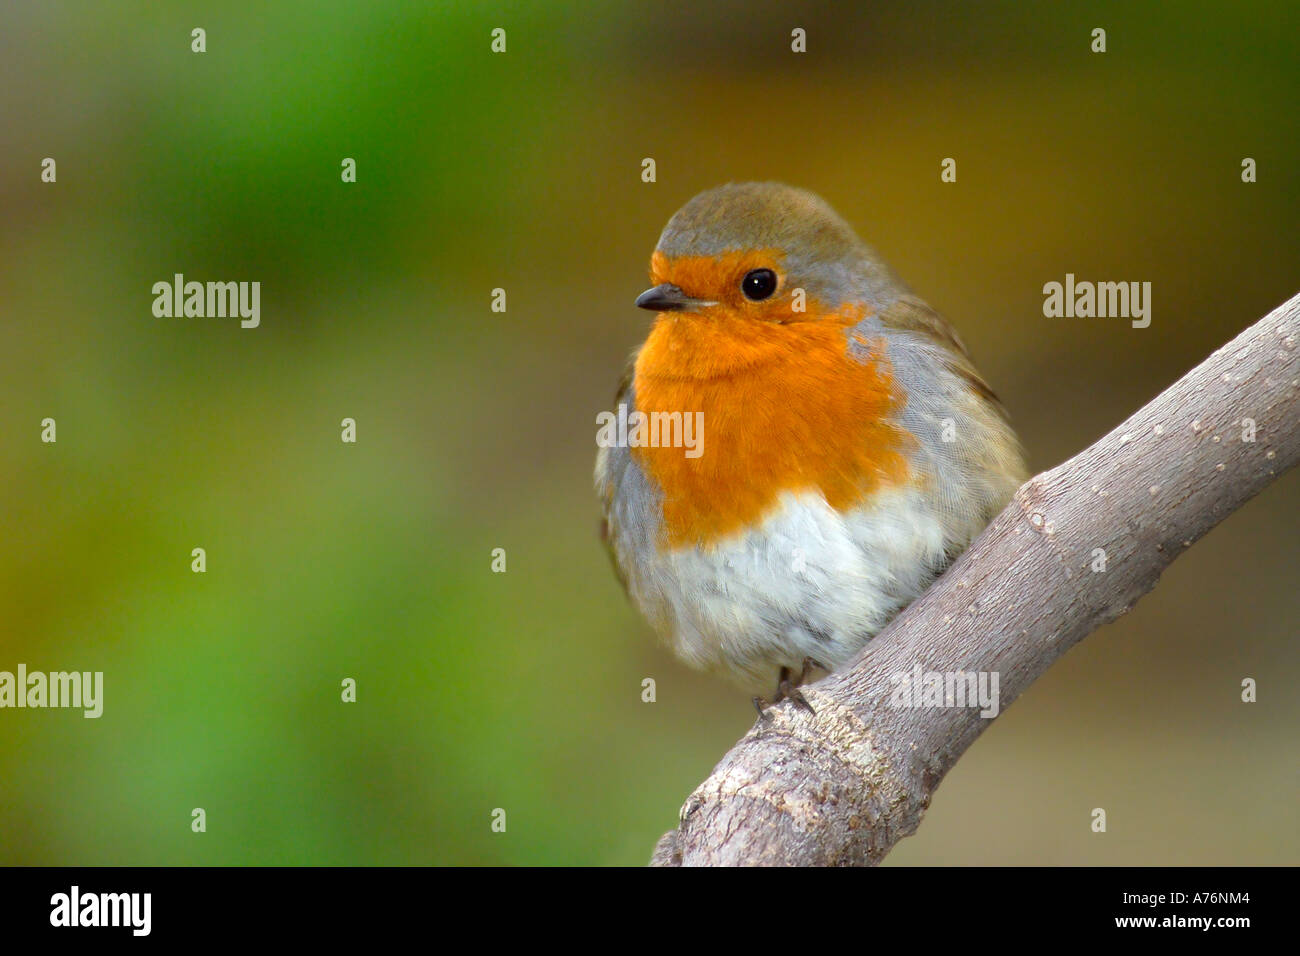 Close up of a European Robin (Erithacus rubecula) perched on the branch of a tree in winter. Stock Photo